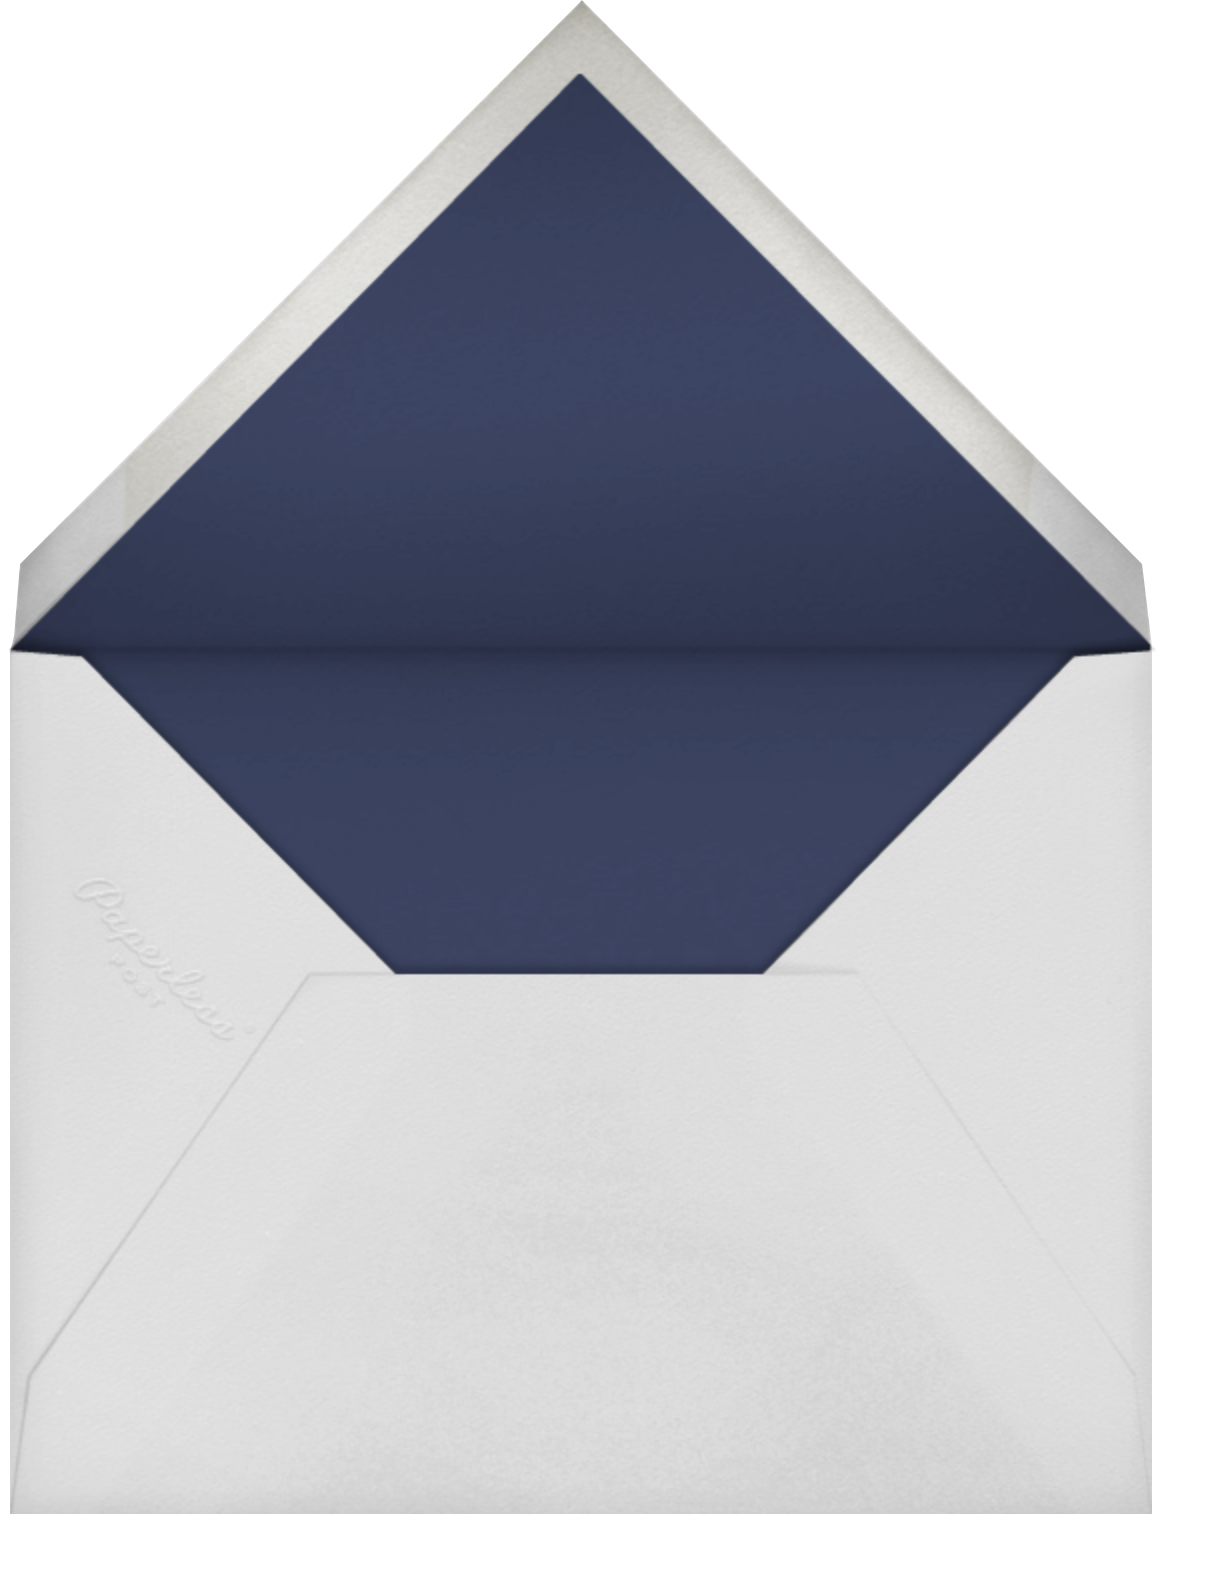 Remnant (New Date) - Silver - Paperless Post - Envelope